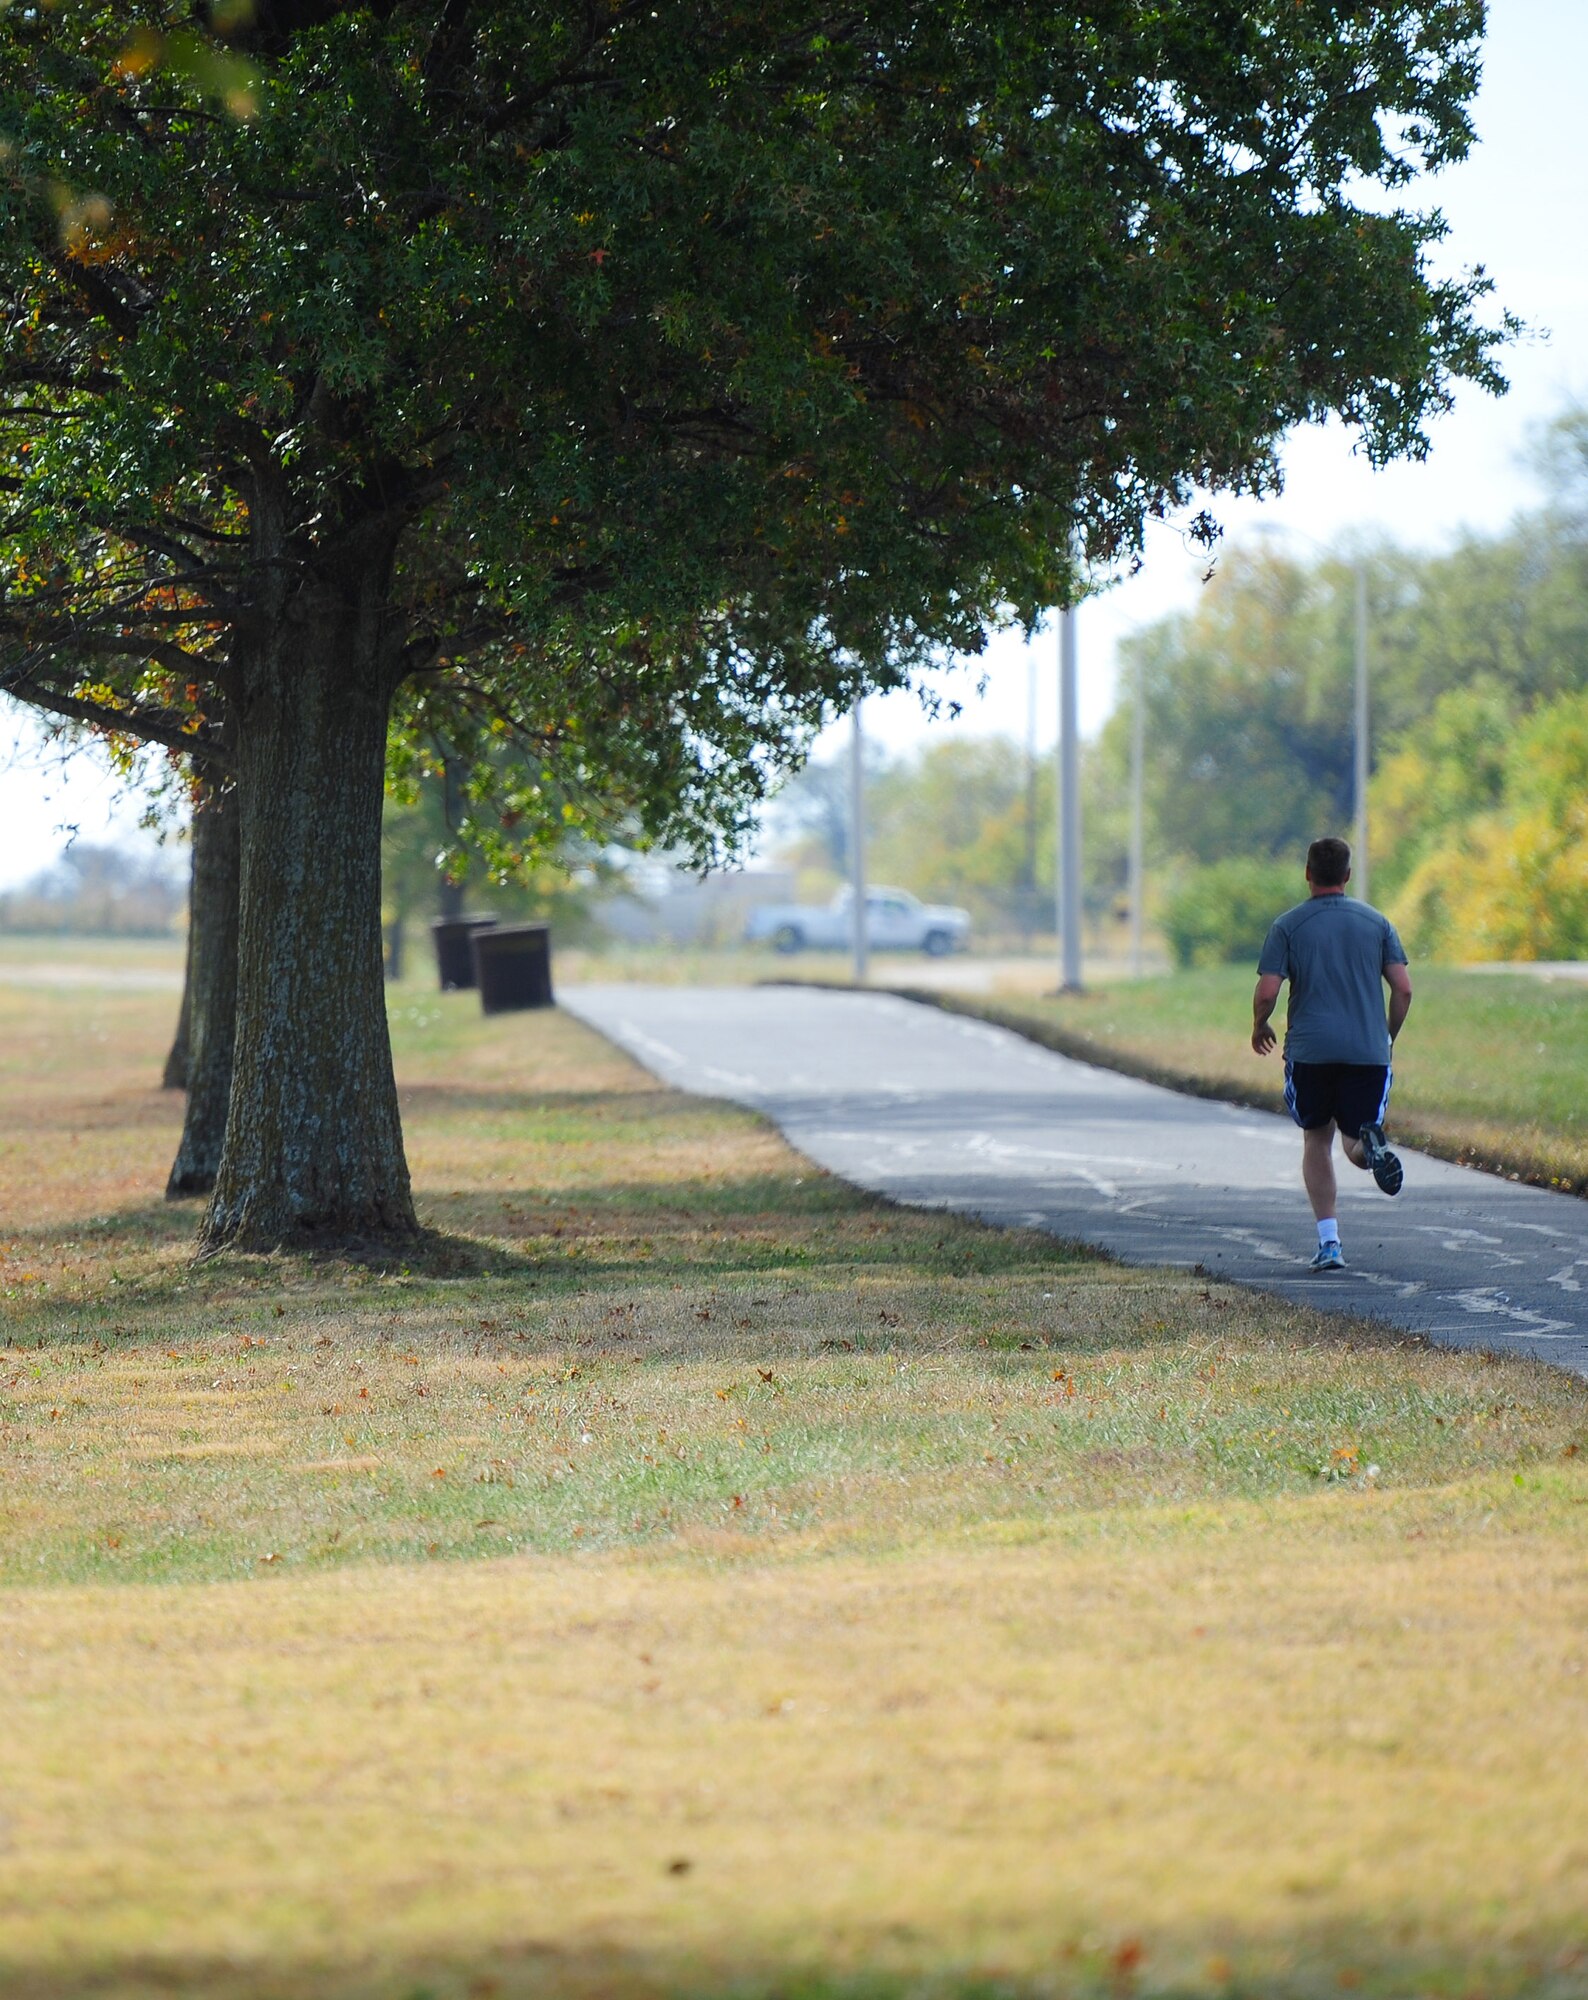 Lt. Col. Tim Rezac, 131st Bomb Wing chief of safety, runs on the jogging path surrounding Ike Skelton Lake Oct. 21, 2015, at Whiteman Air Force Base, Mo. The path is currently closed for repairs, to include joint and surface sealing, and is scheduled to reopen at the end of the month. (U.S. Air Force photo by Airman 1st Class Jazmin Smith/Released)